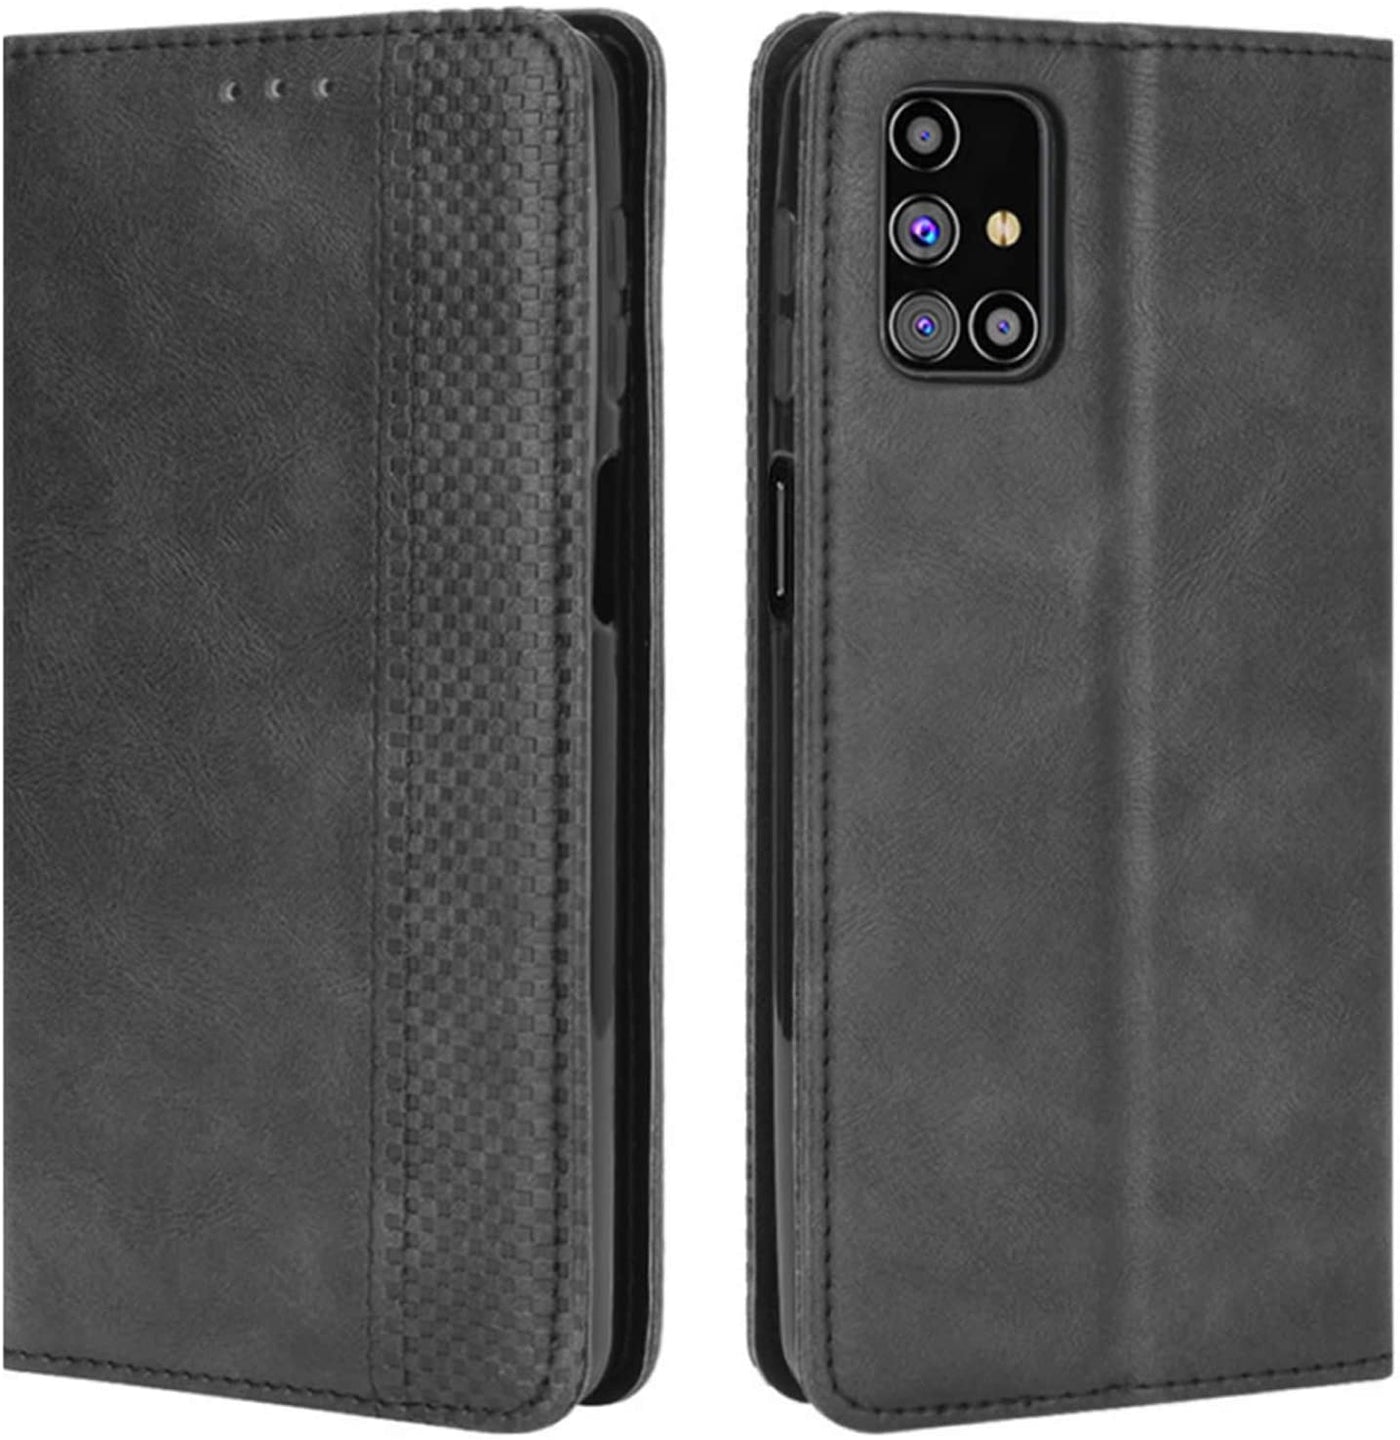 Samsung Galaxy M51 black color leather wallet flip cover case By excelsior